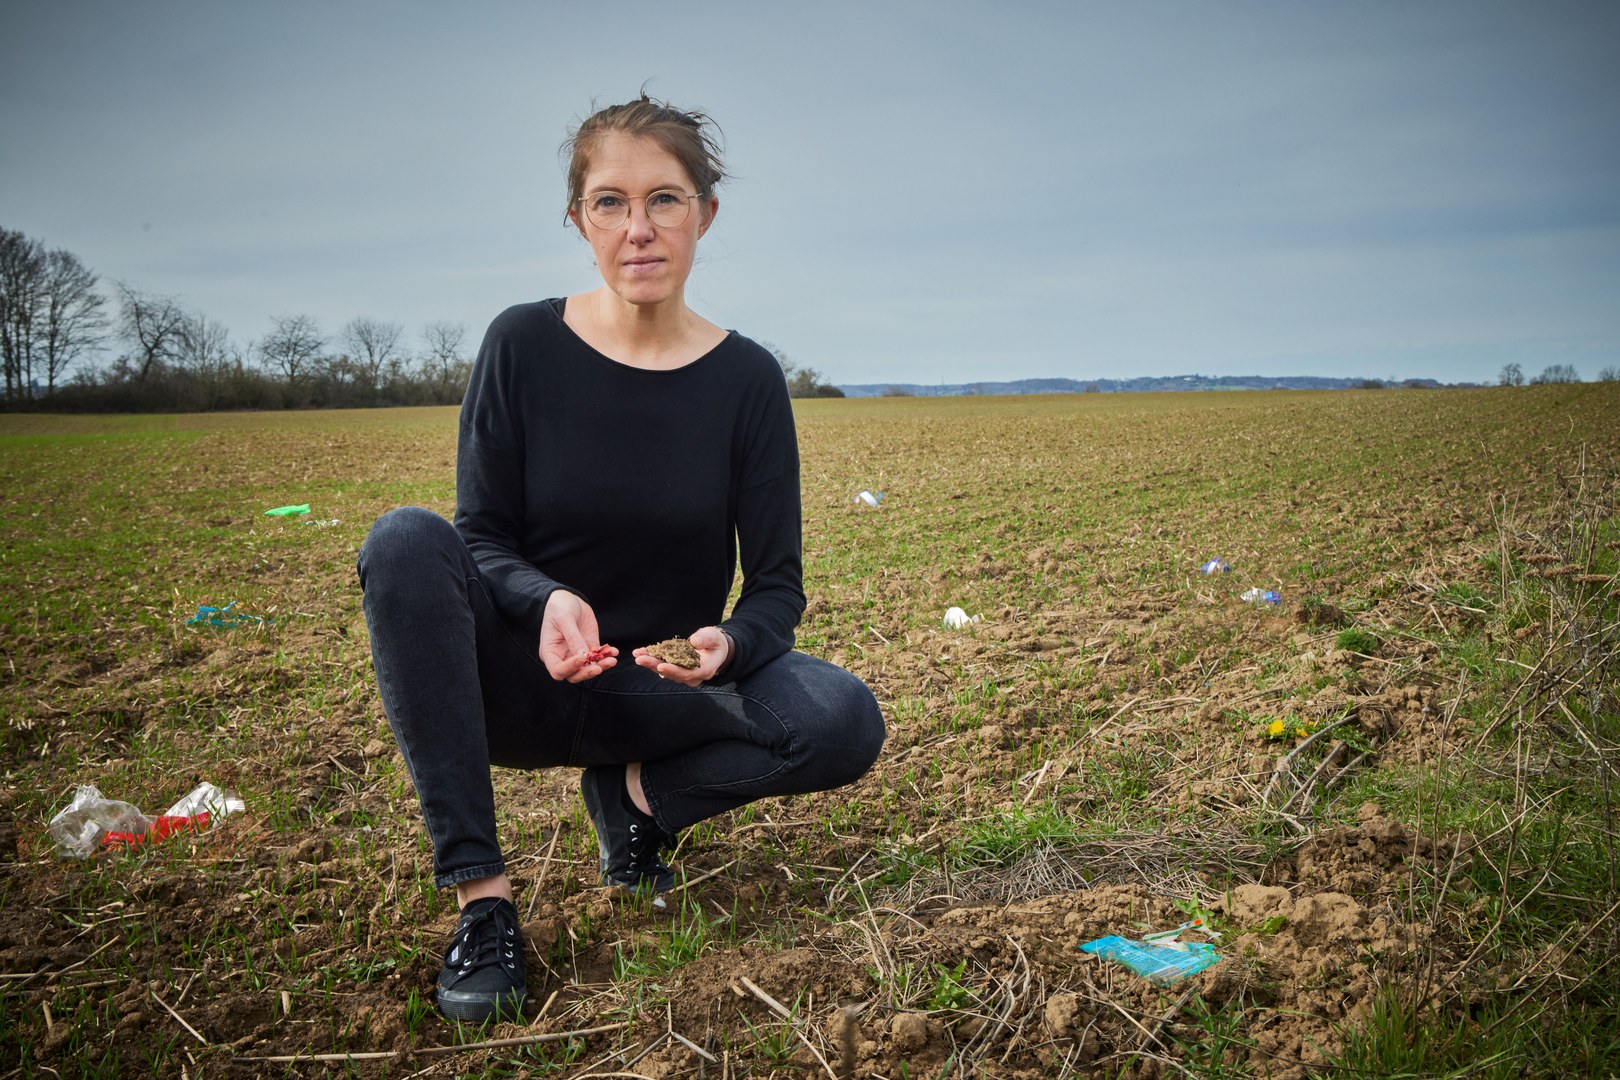 The soil is one of the most important building blocks of our food production. For Dr. Melanie Braun, therefore, the presence of nanoparticles in it must be investigated as a matter of urgency. She and her team are developing a new analytical technique for doing just that.